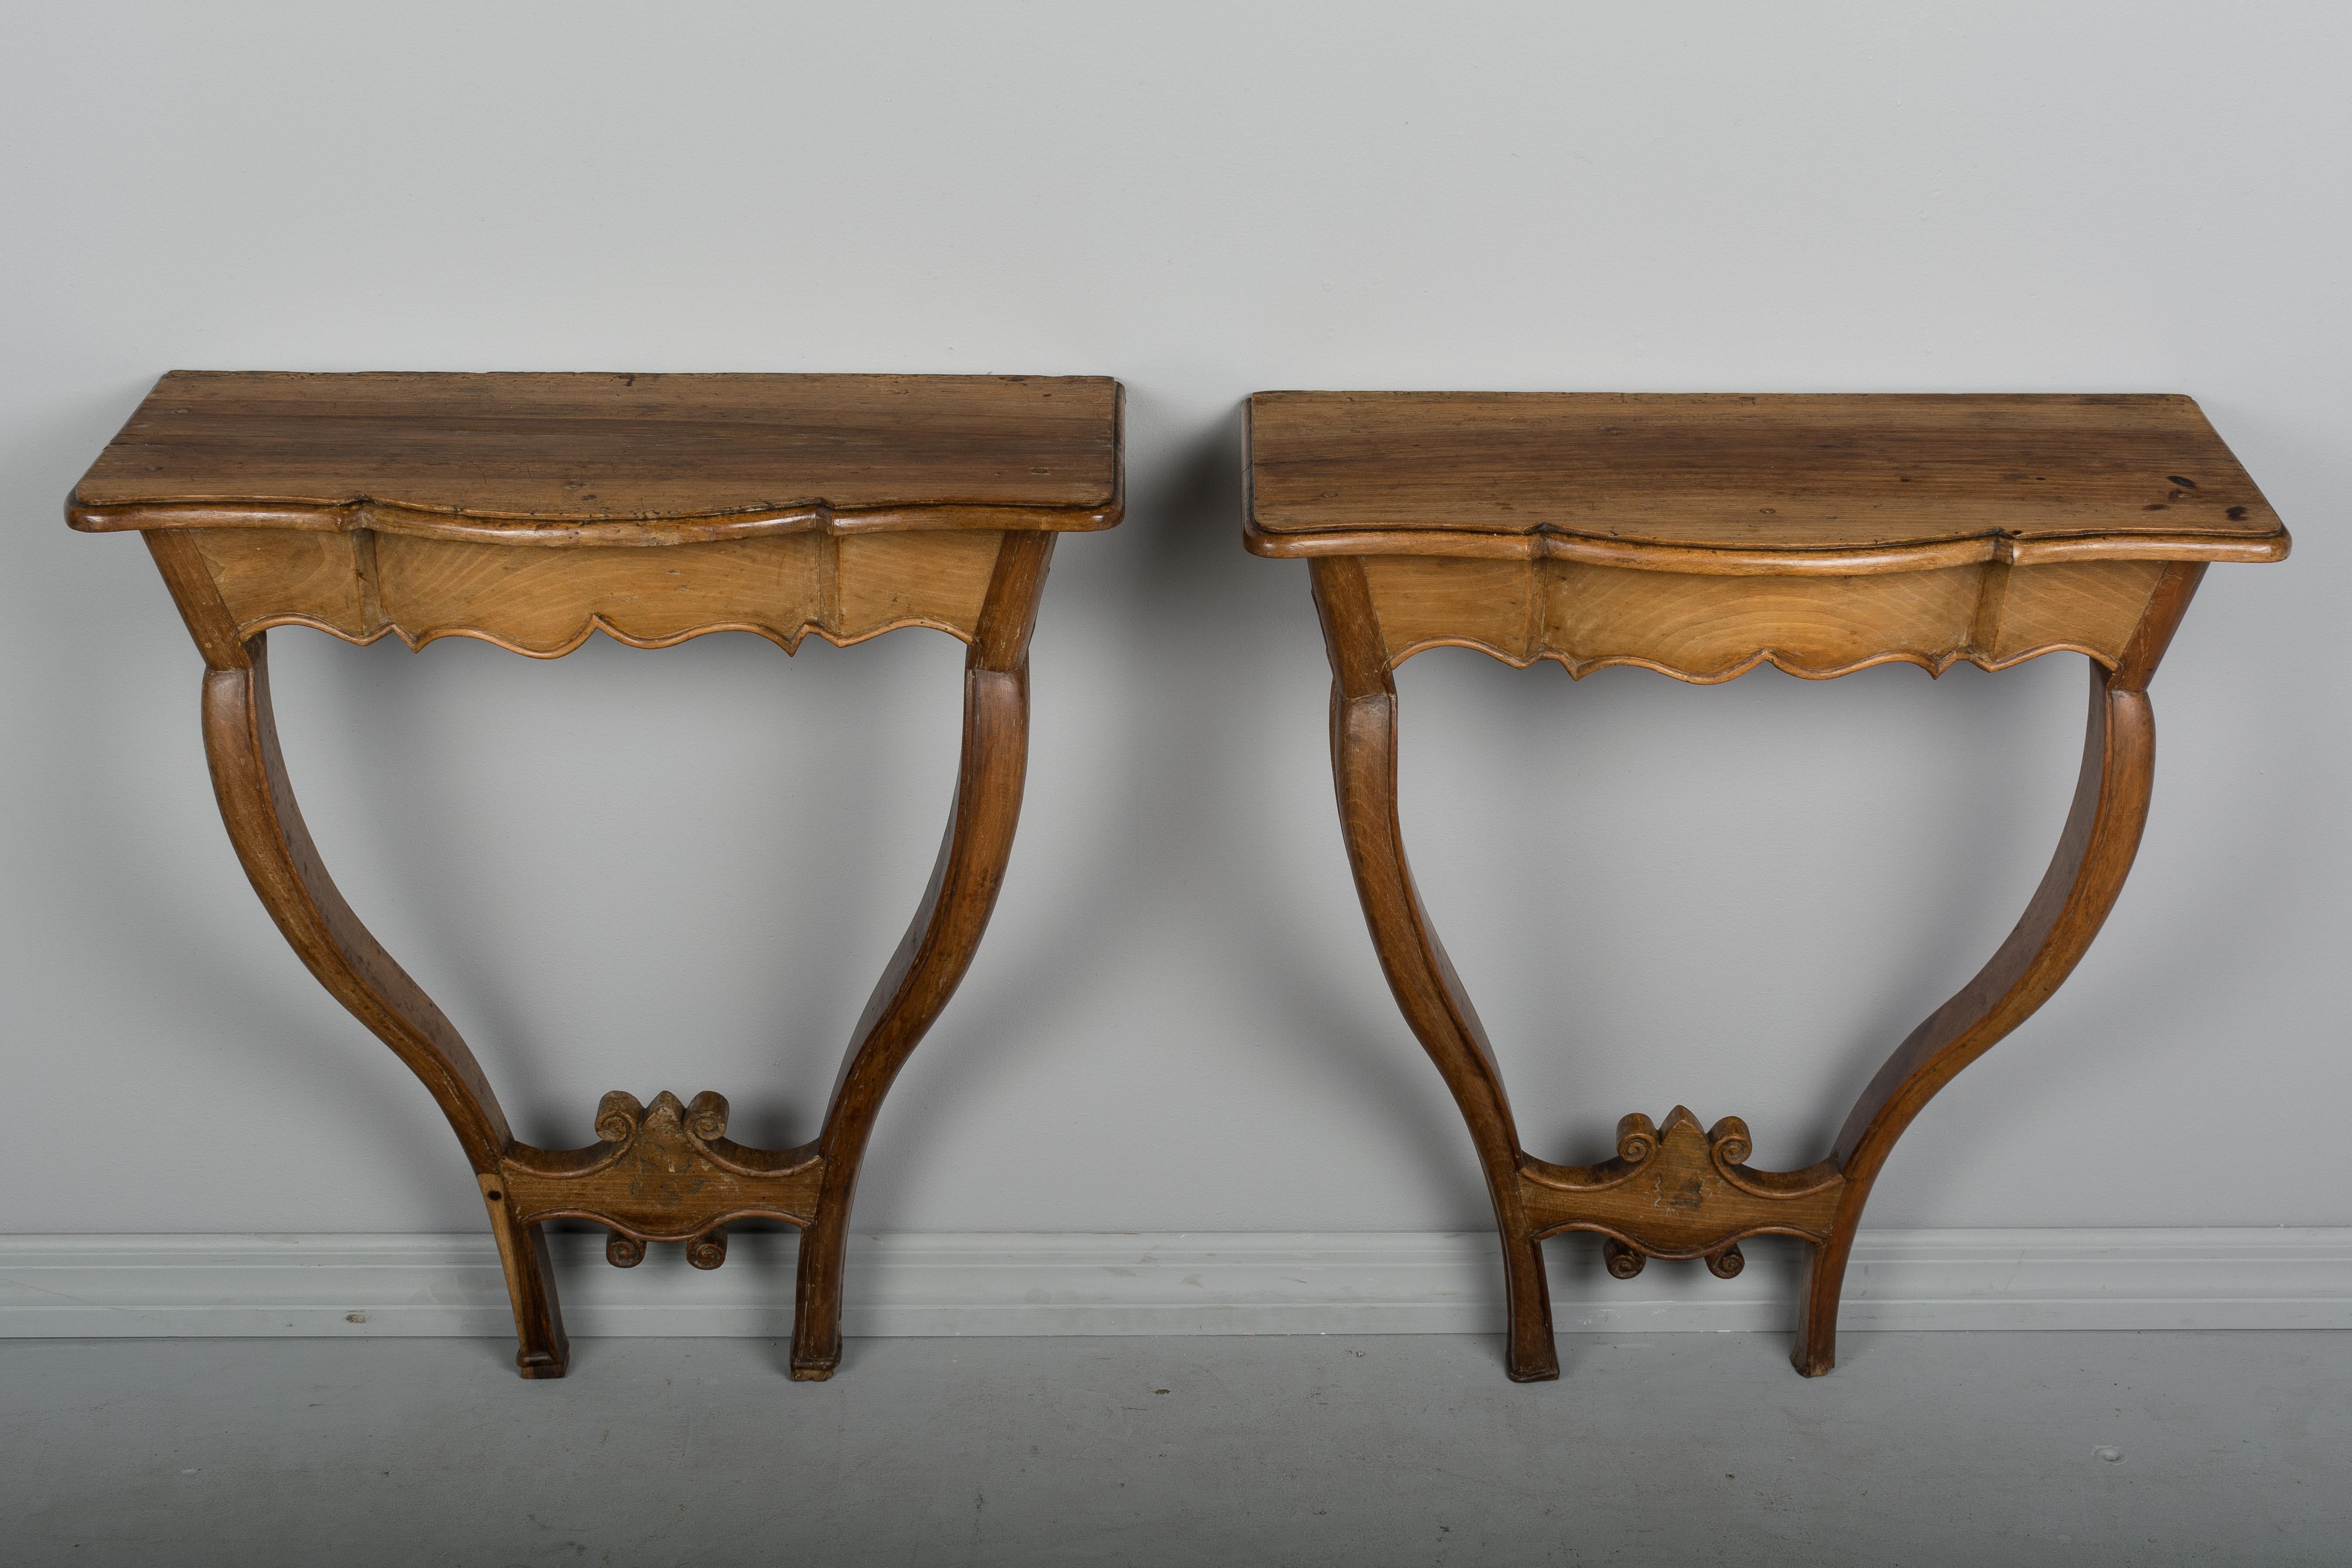 Hand-Carved Pair of 18th Century French Console Tables